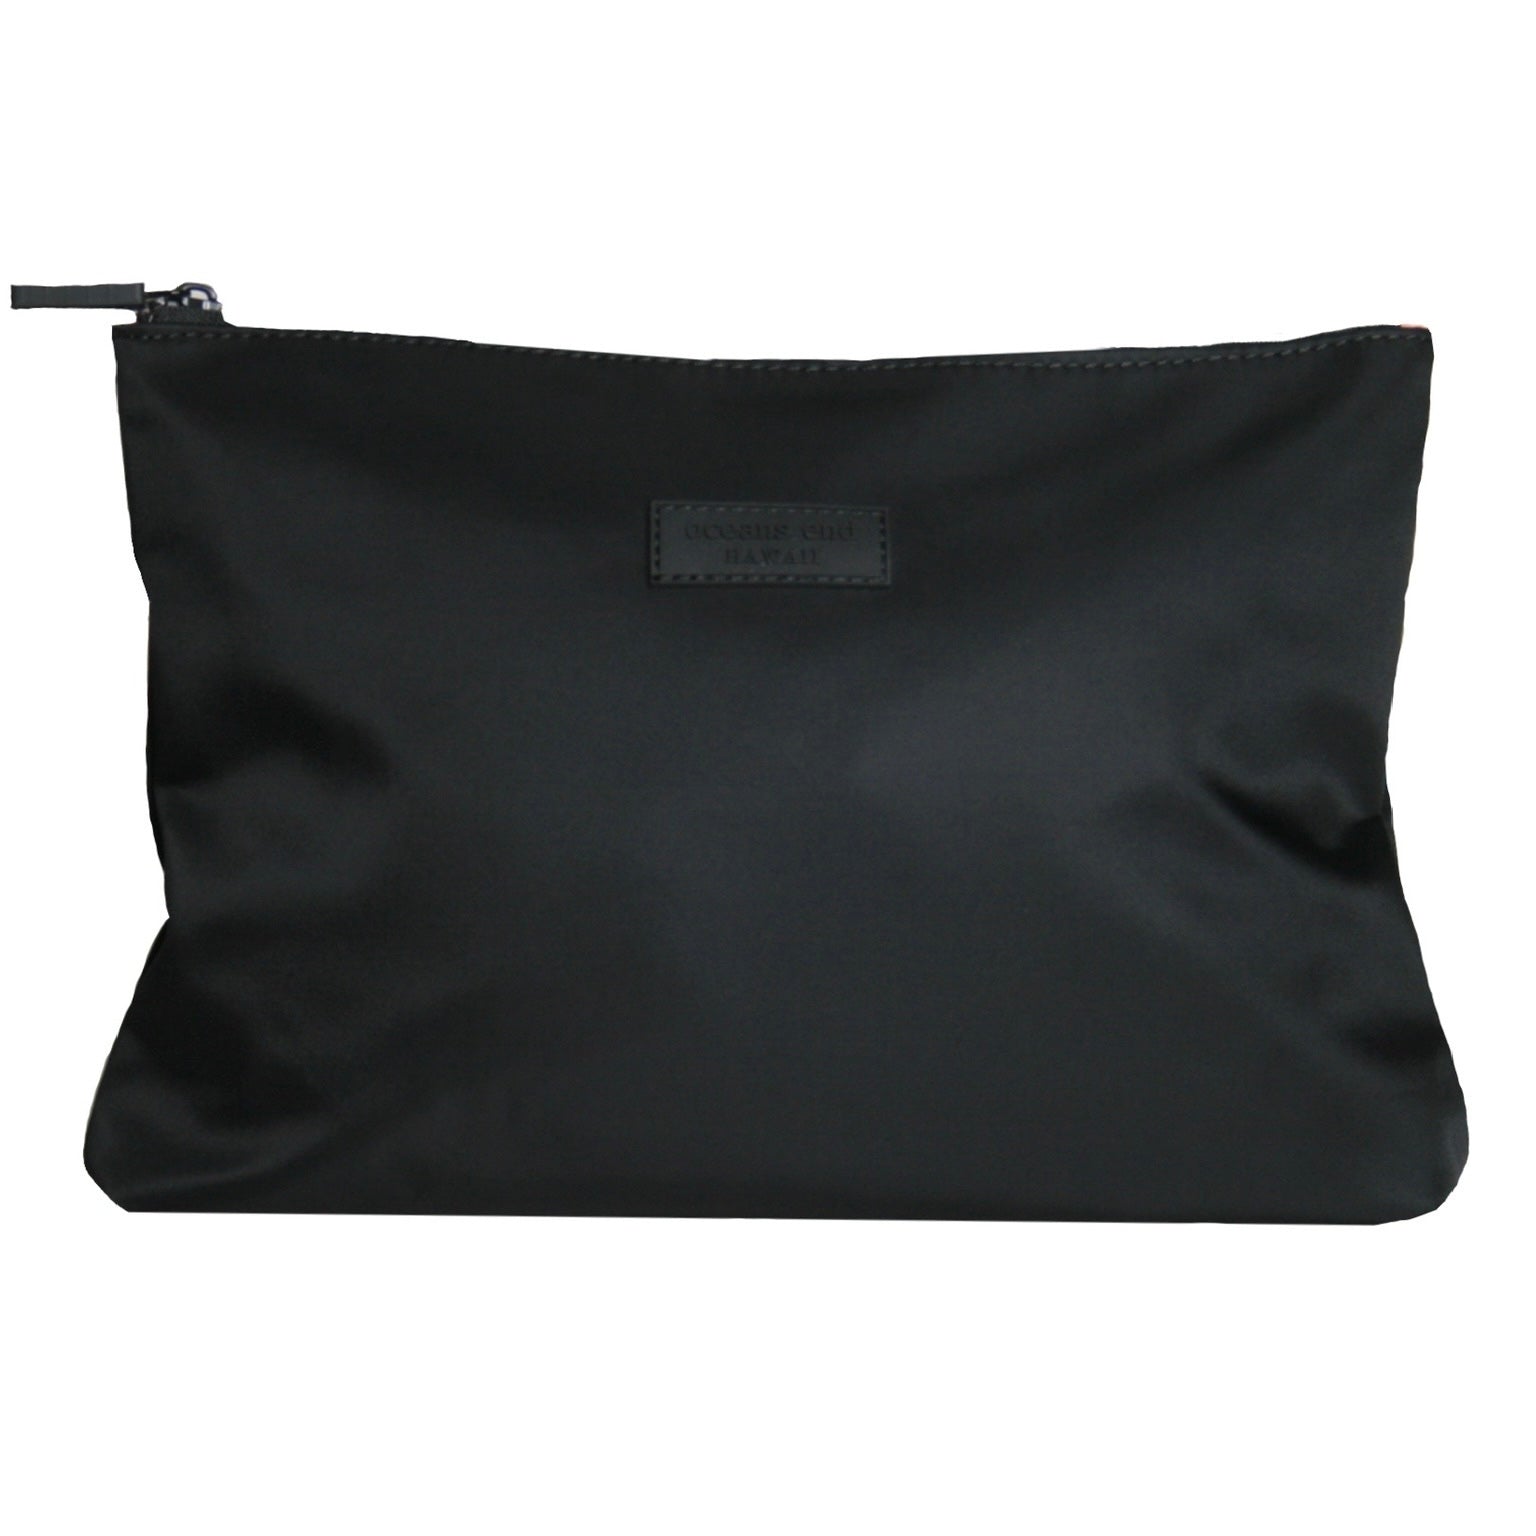 black zippered pouch with black hardware - Oceans End